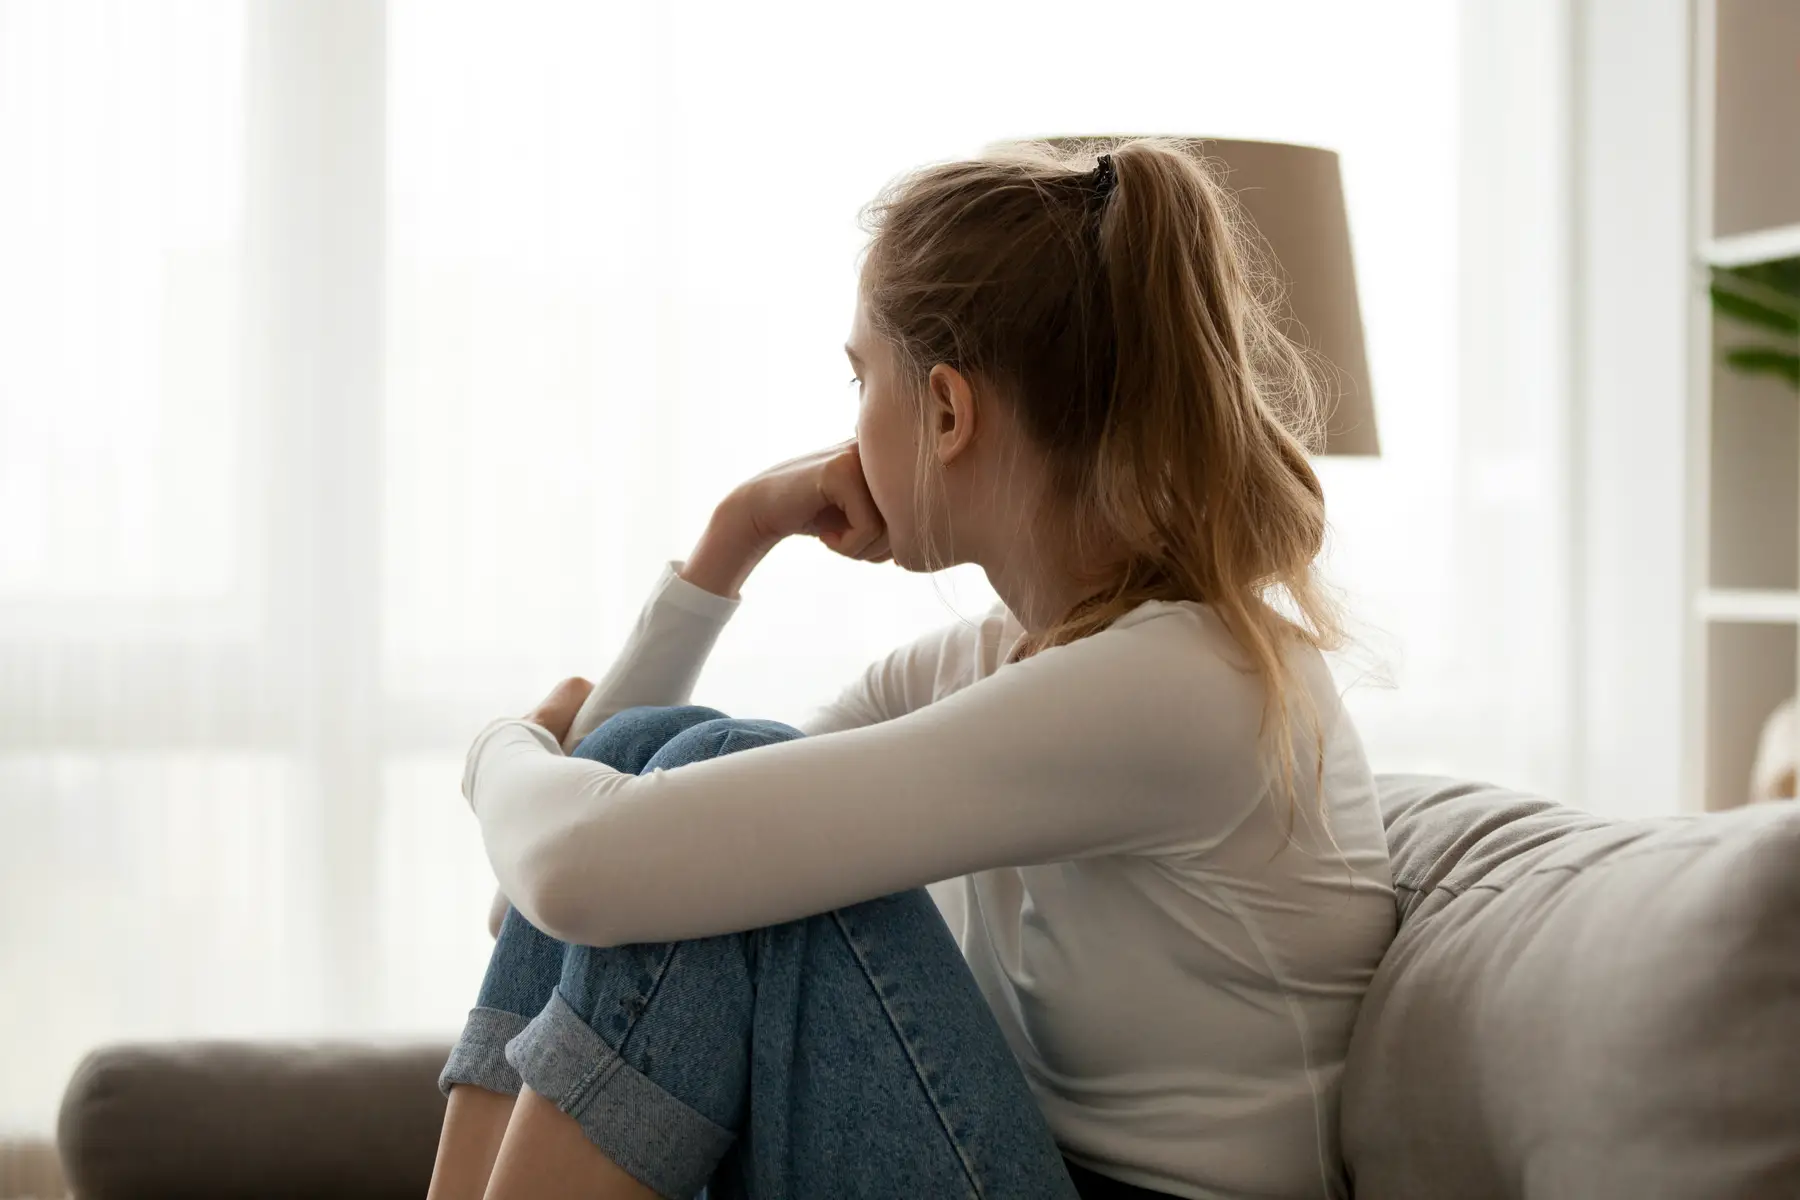 Pensive woman sitting on a couch